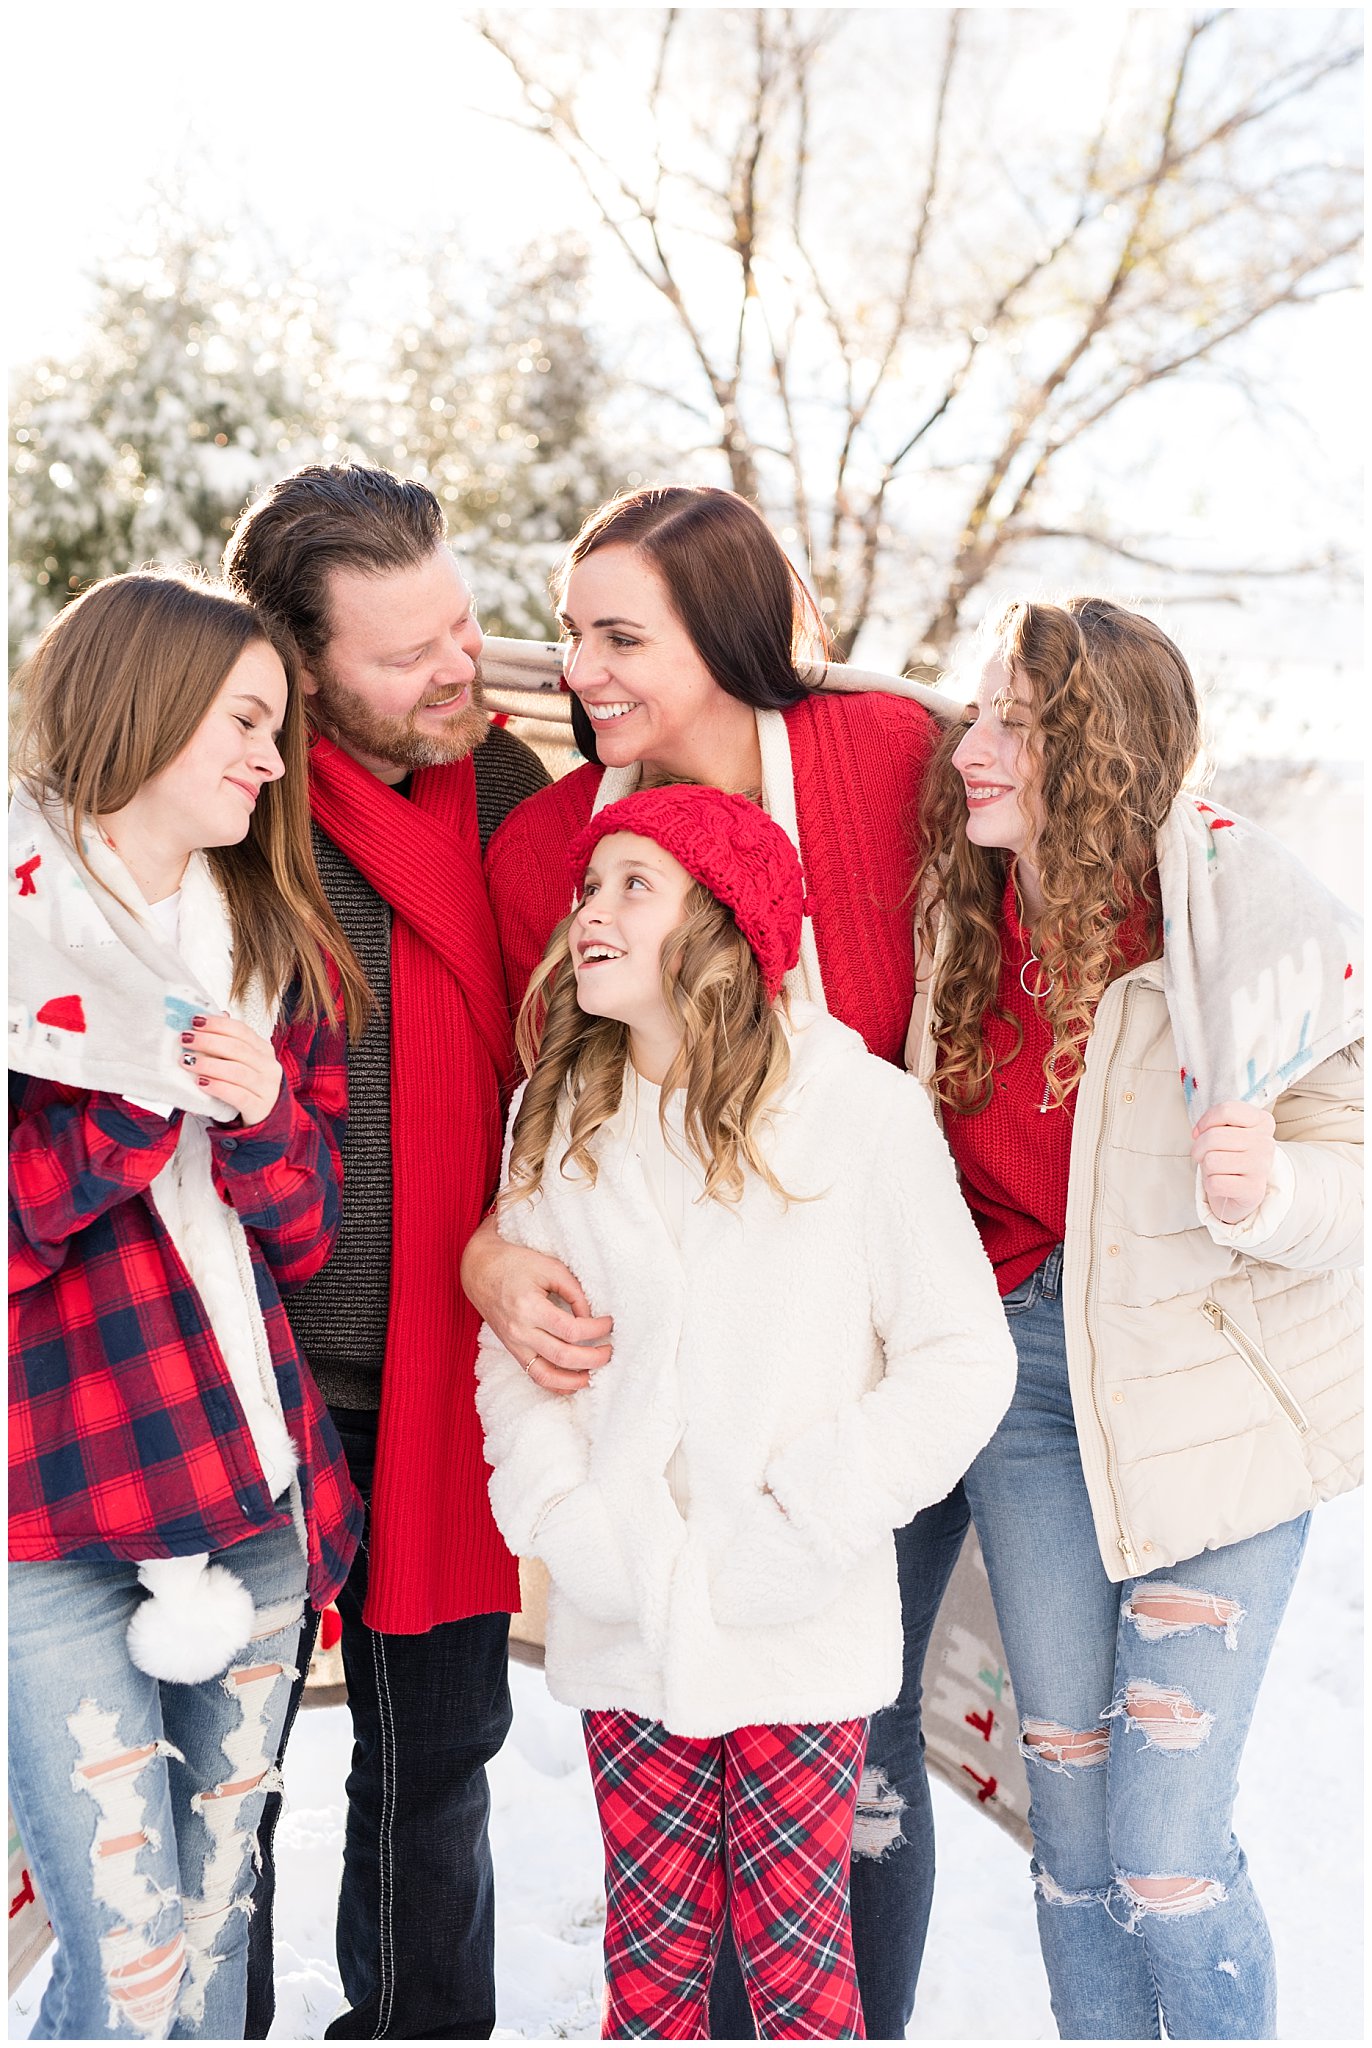 Family laughing and smiling in the snow | Utah Family Christmas Photoshoot | Oak Hills Reception and Event | Jessie and Dallin Photography